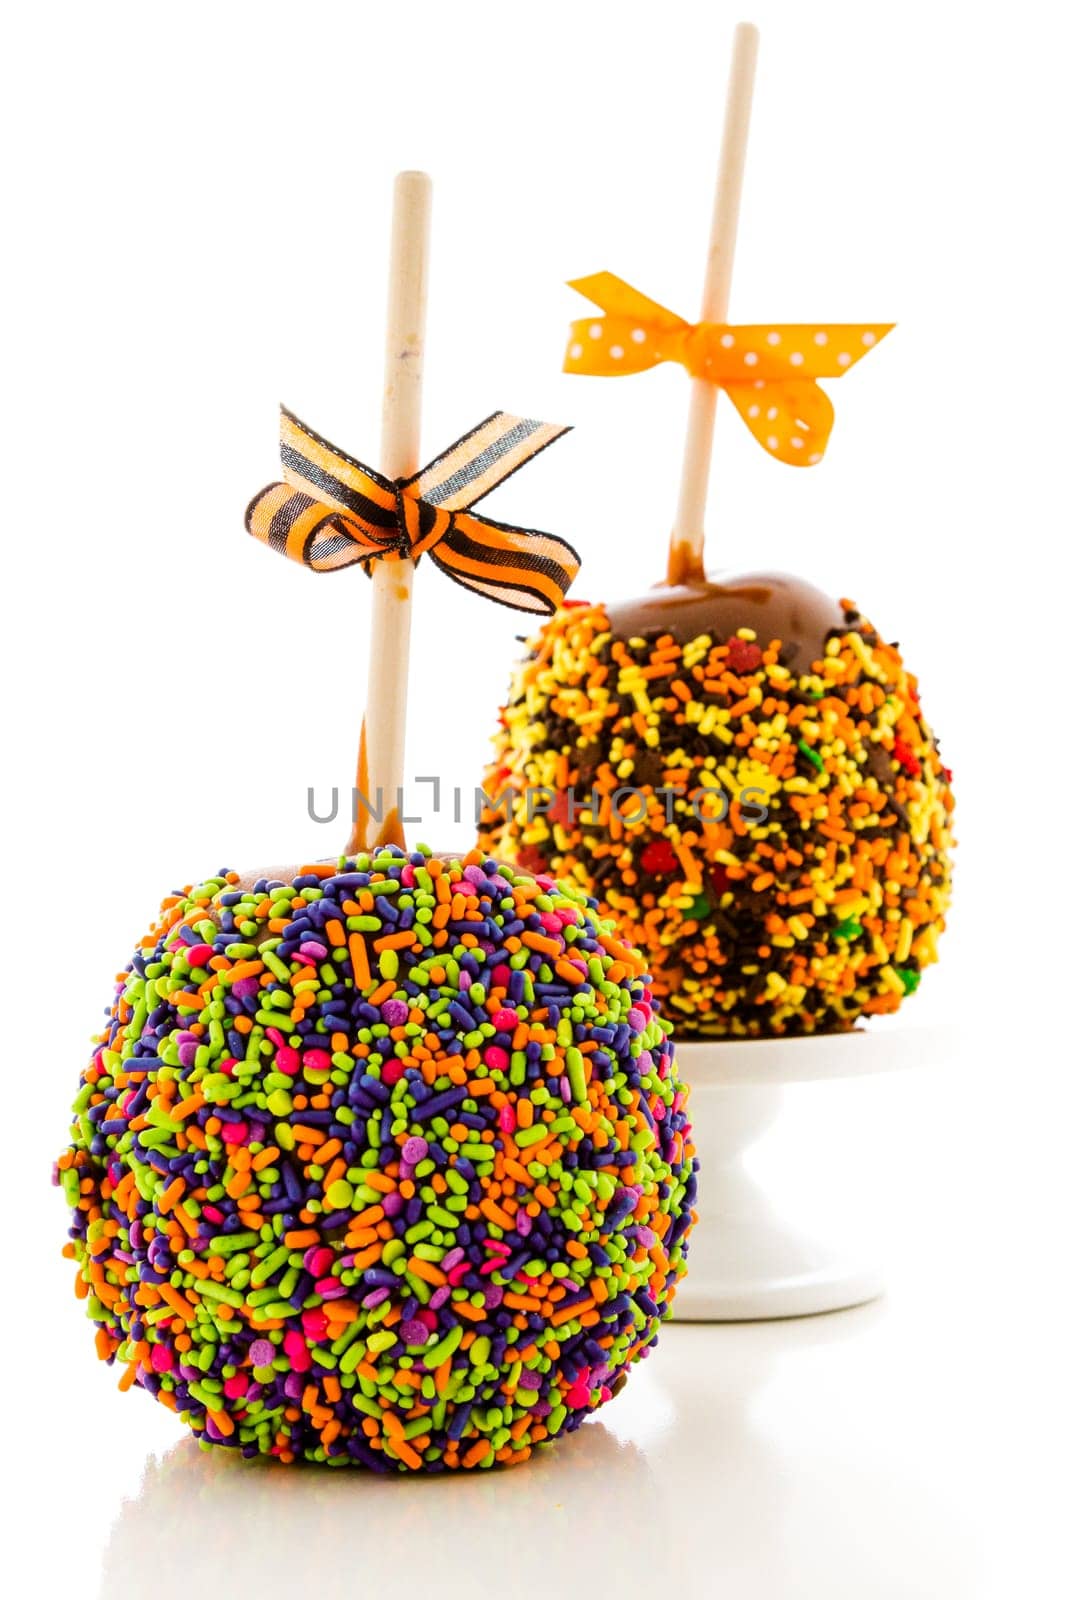 Hand dipped caramel apple covered with multi color sprinkles.